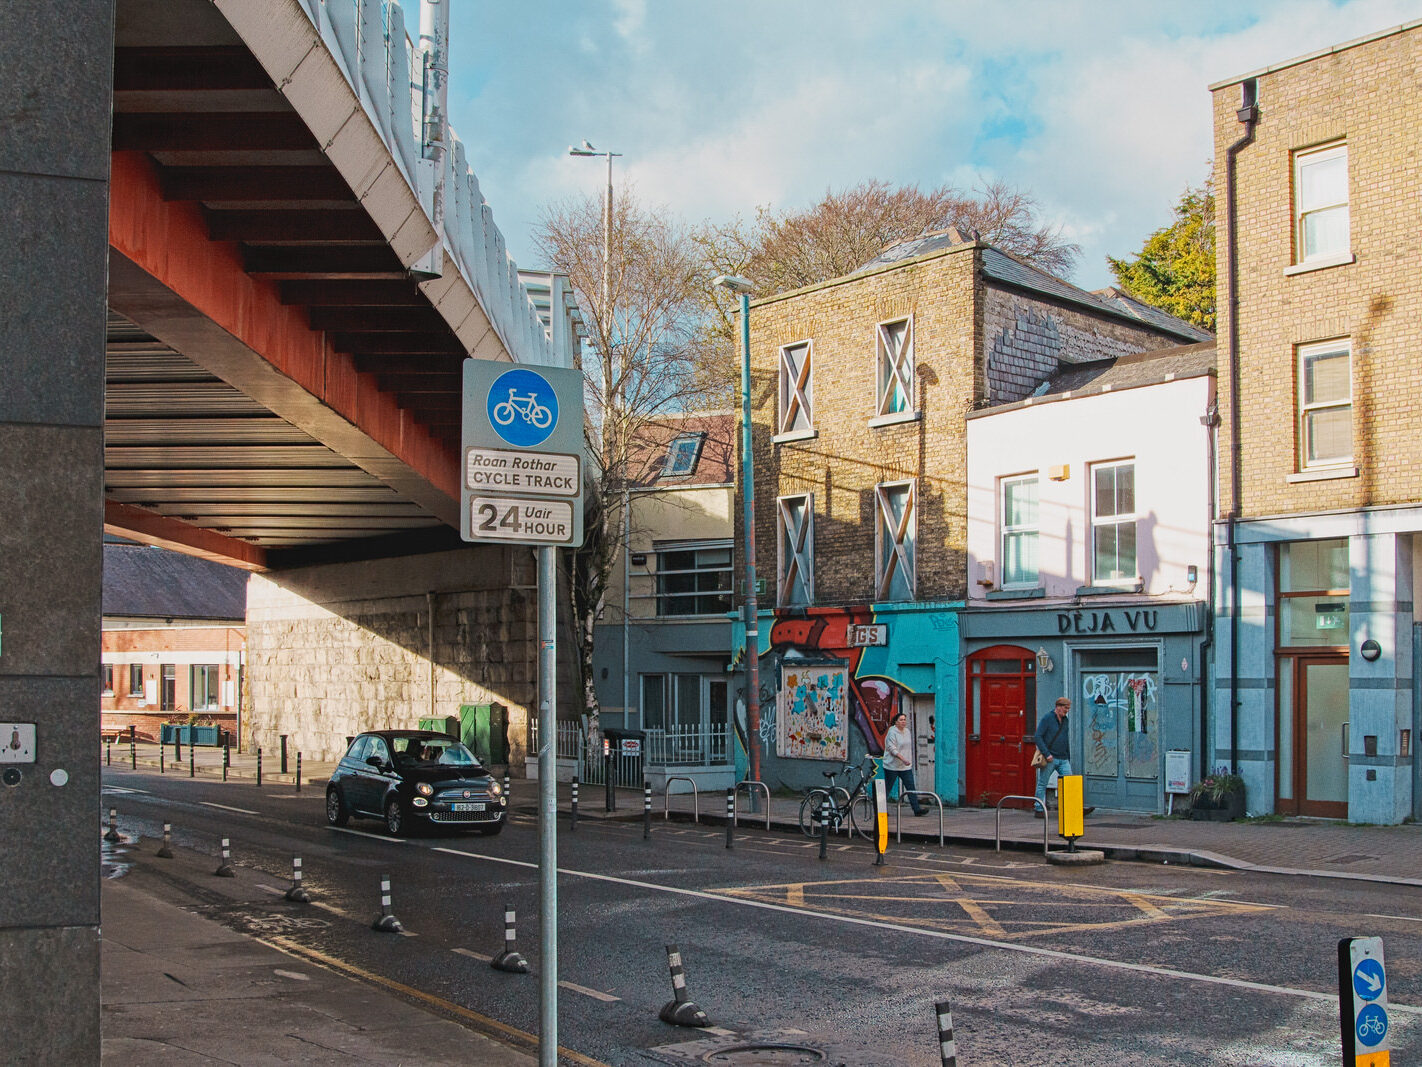 THE RANELAGH LUAS TRAM STOP [AND HOW TO PRONOUNCE RANELAGH]-231210-1